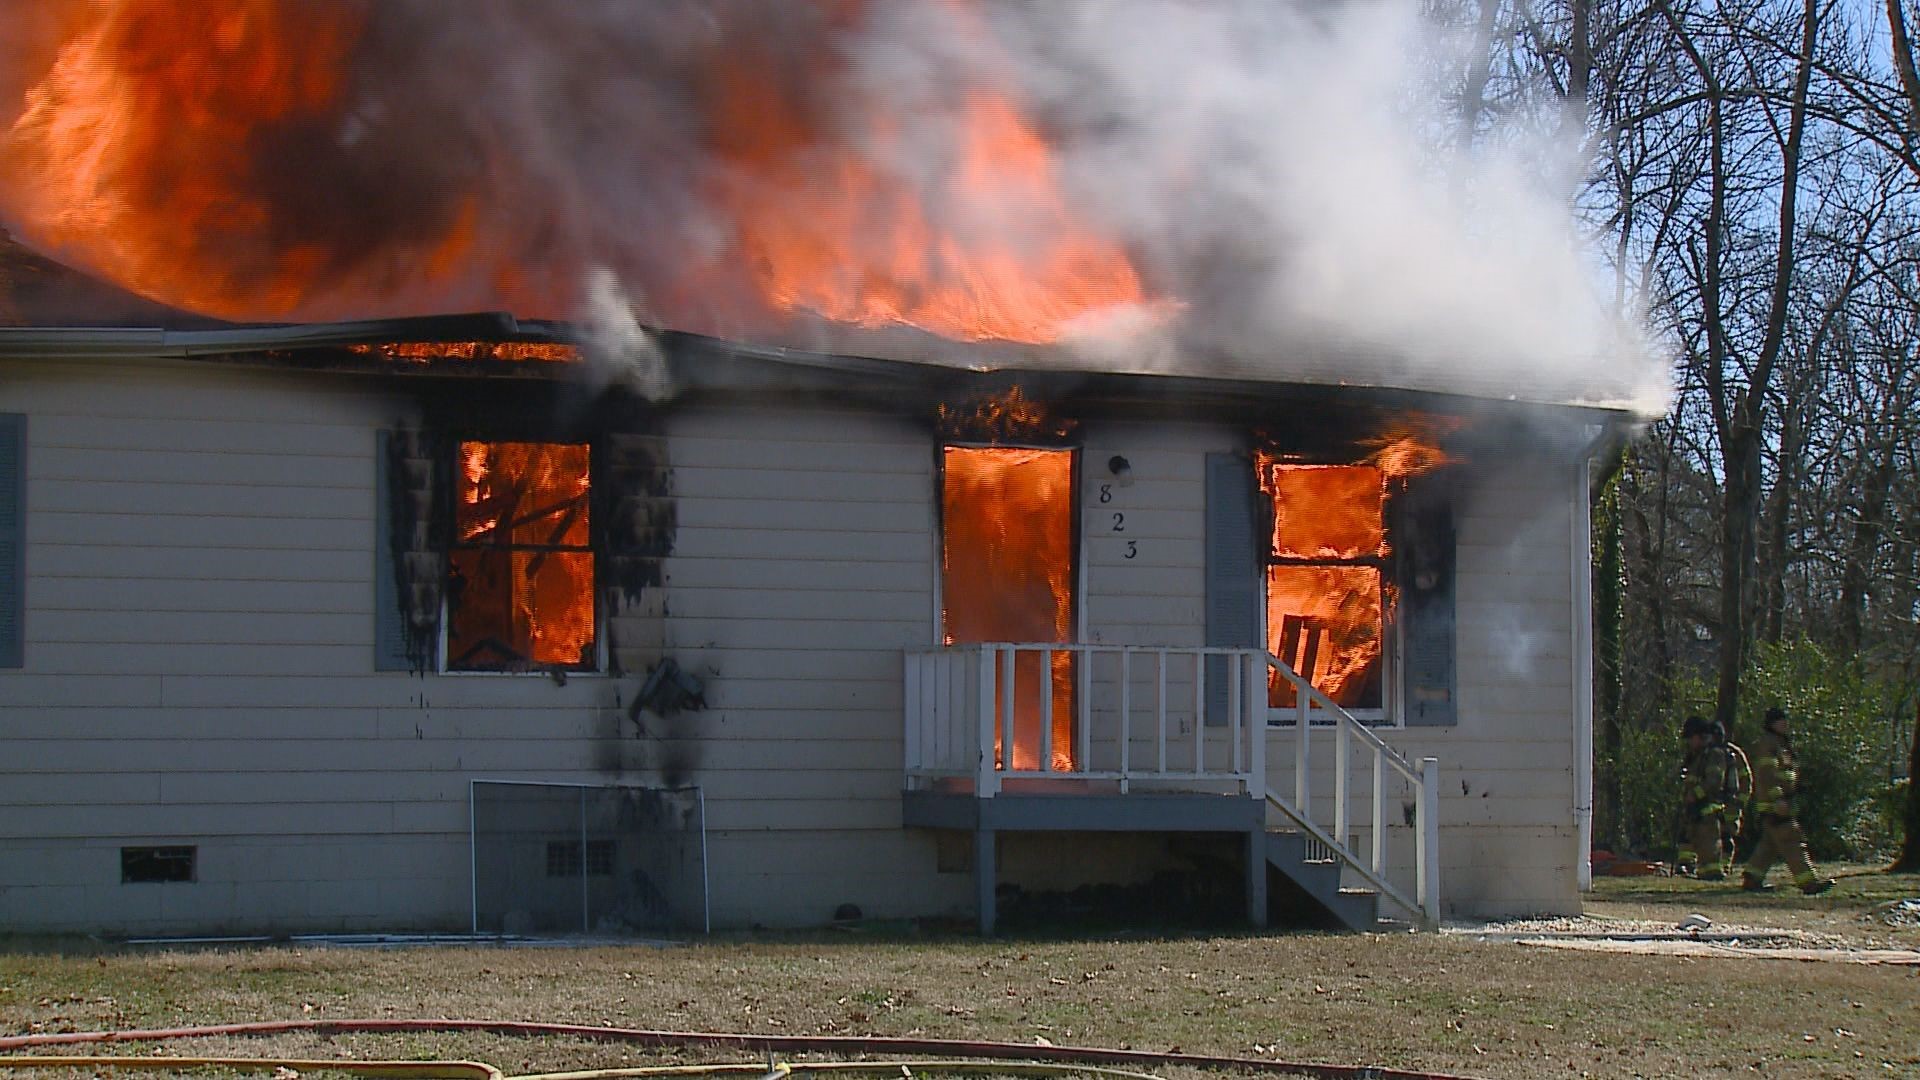 The Greensboro Fire Department spent most of the day training new recruits, and what better way to train than to burn something down. They intentionally torched a house on Cole street in Greensboro Tuesday so recruits could get hands-on training.